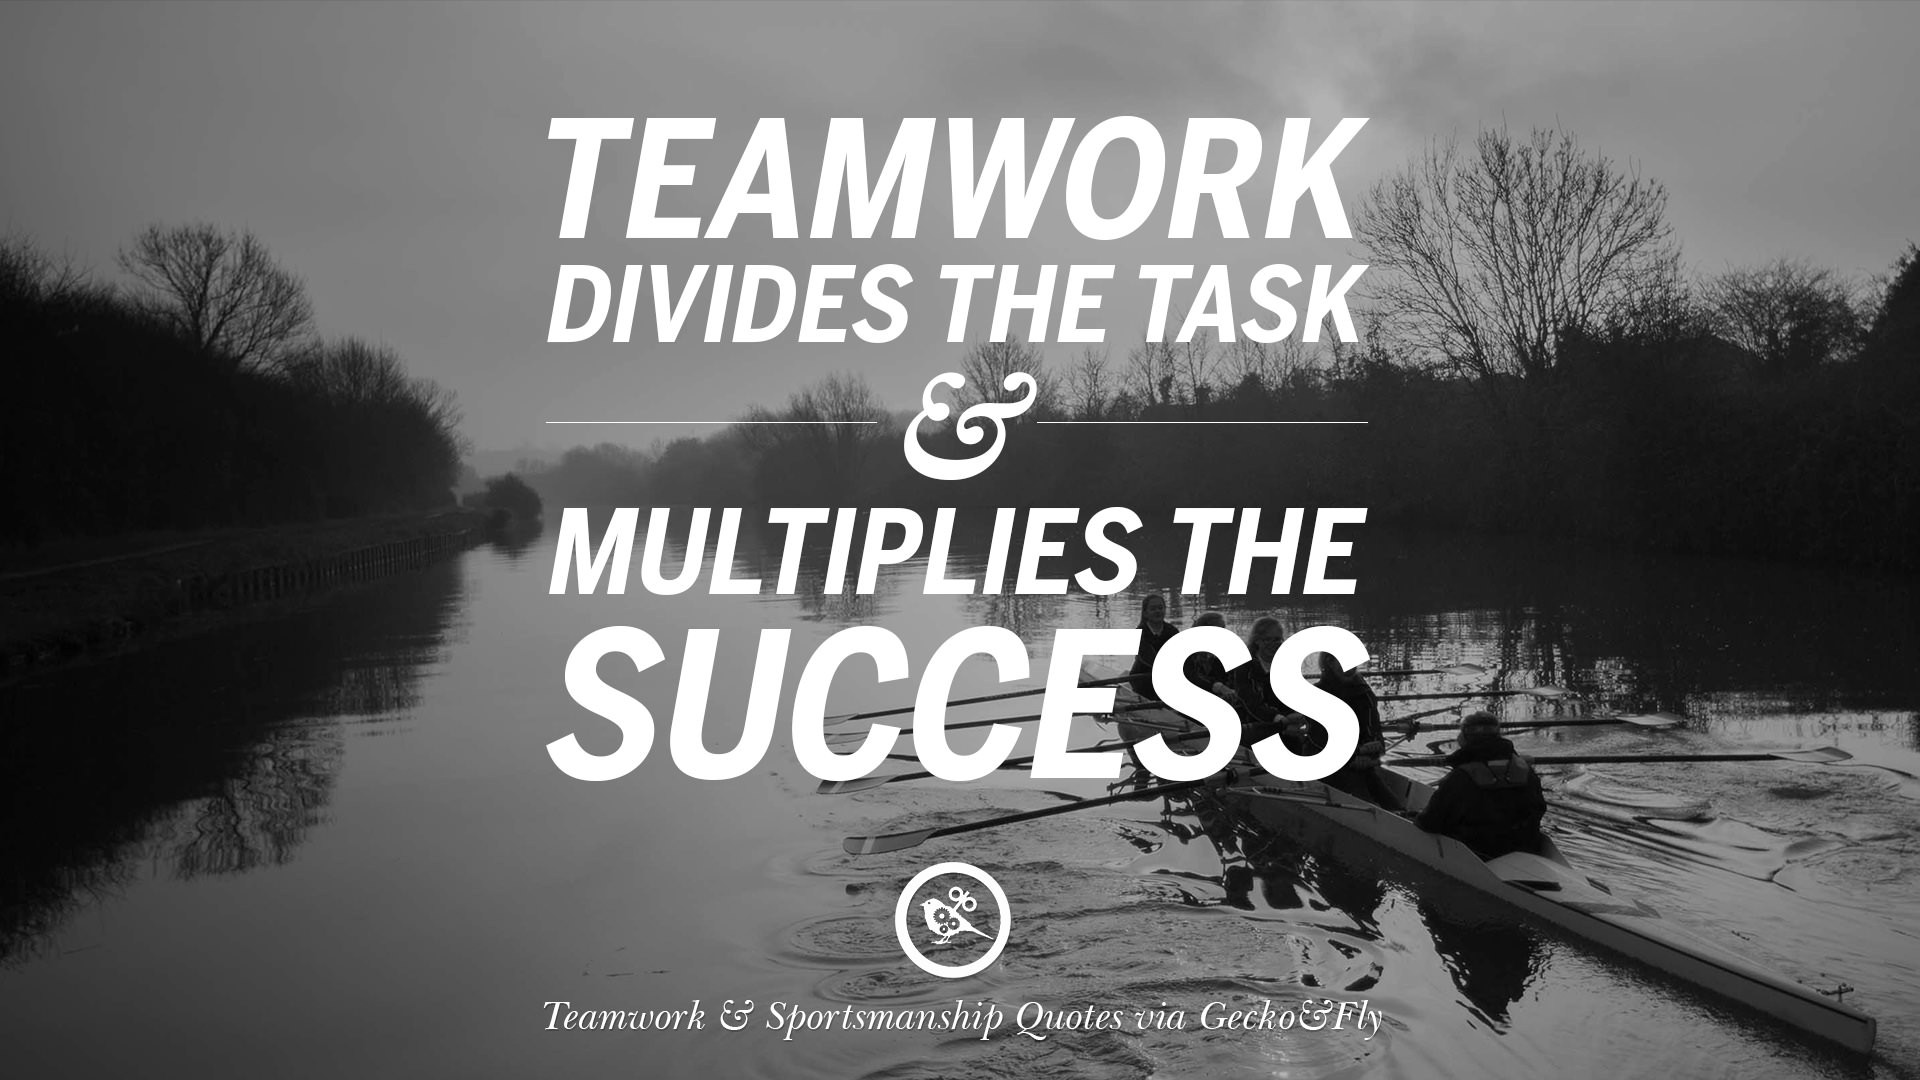 Motivational Quotes For Success
 50 Inspirational Quotes About Teamwork And Sportsmanship